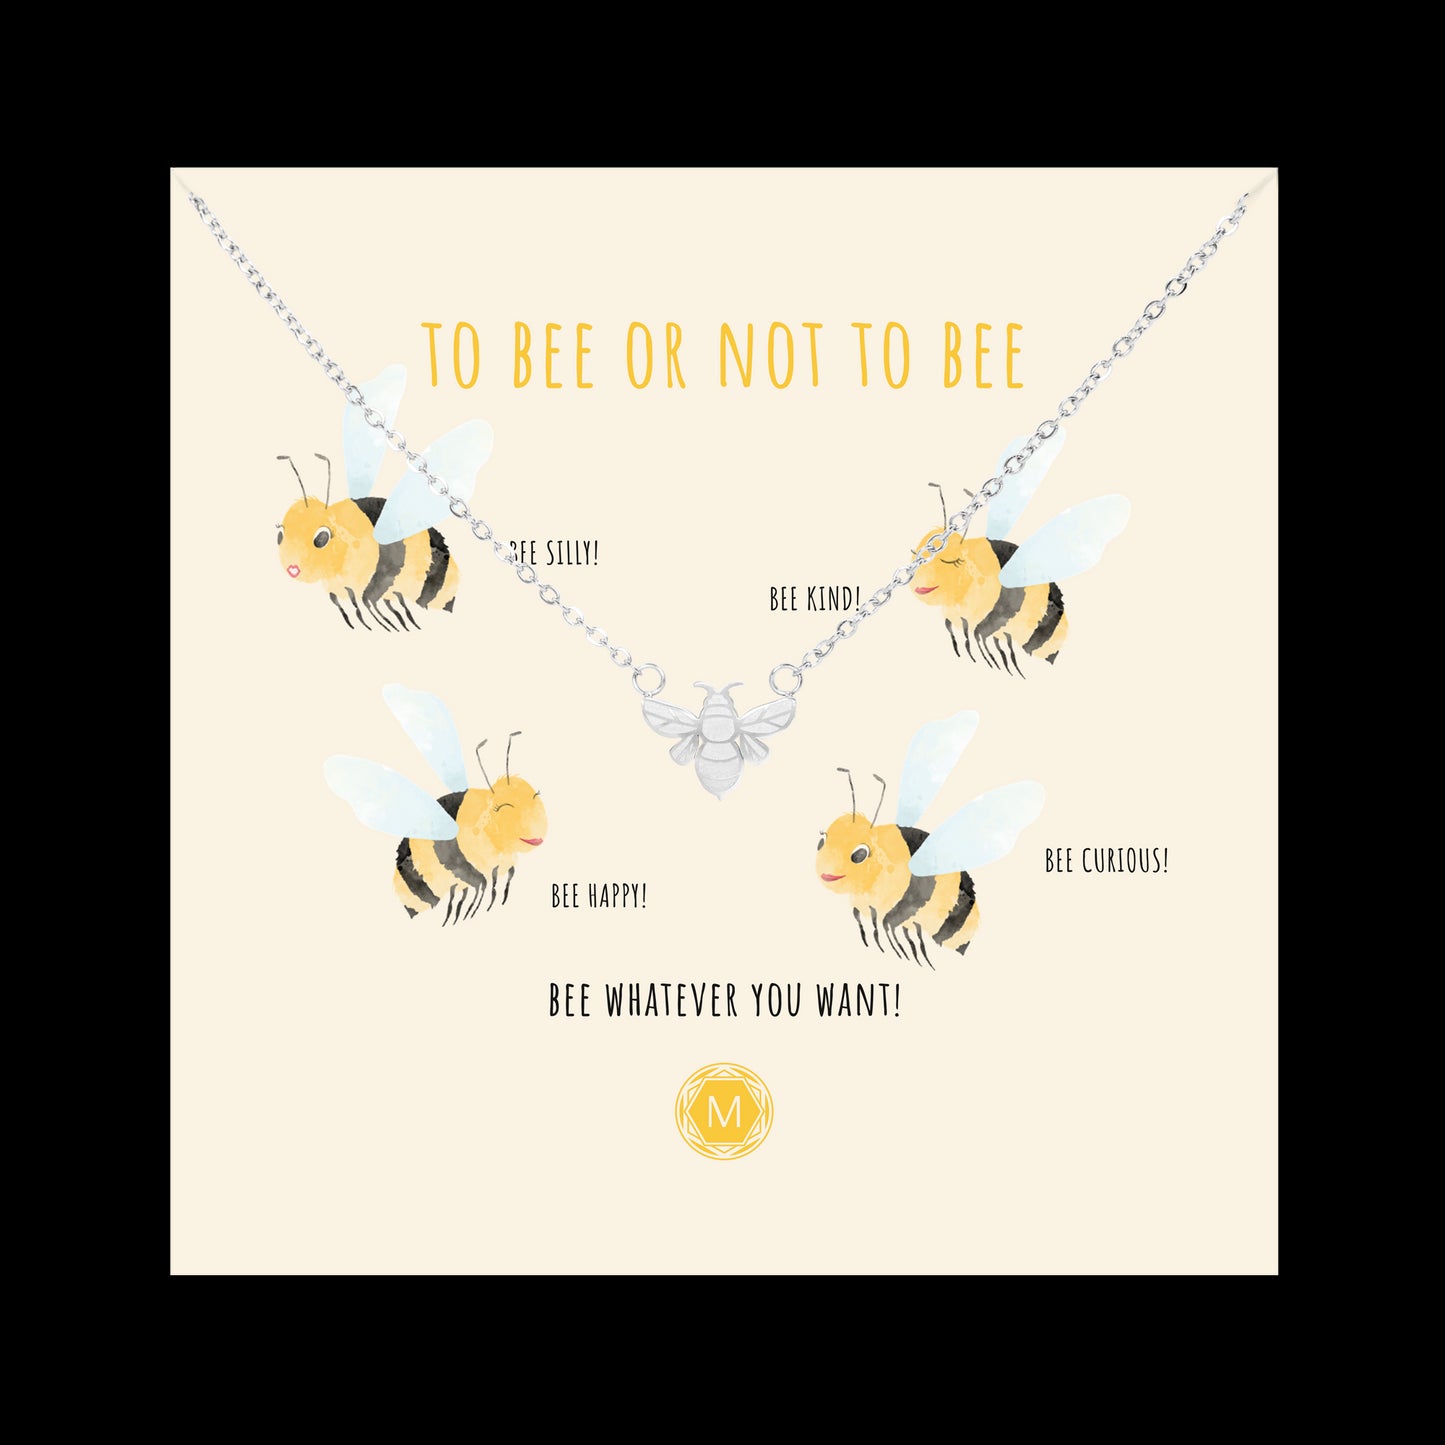 TO BEE OR NOT TO BEE Collana